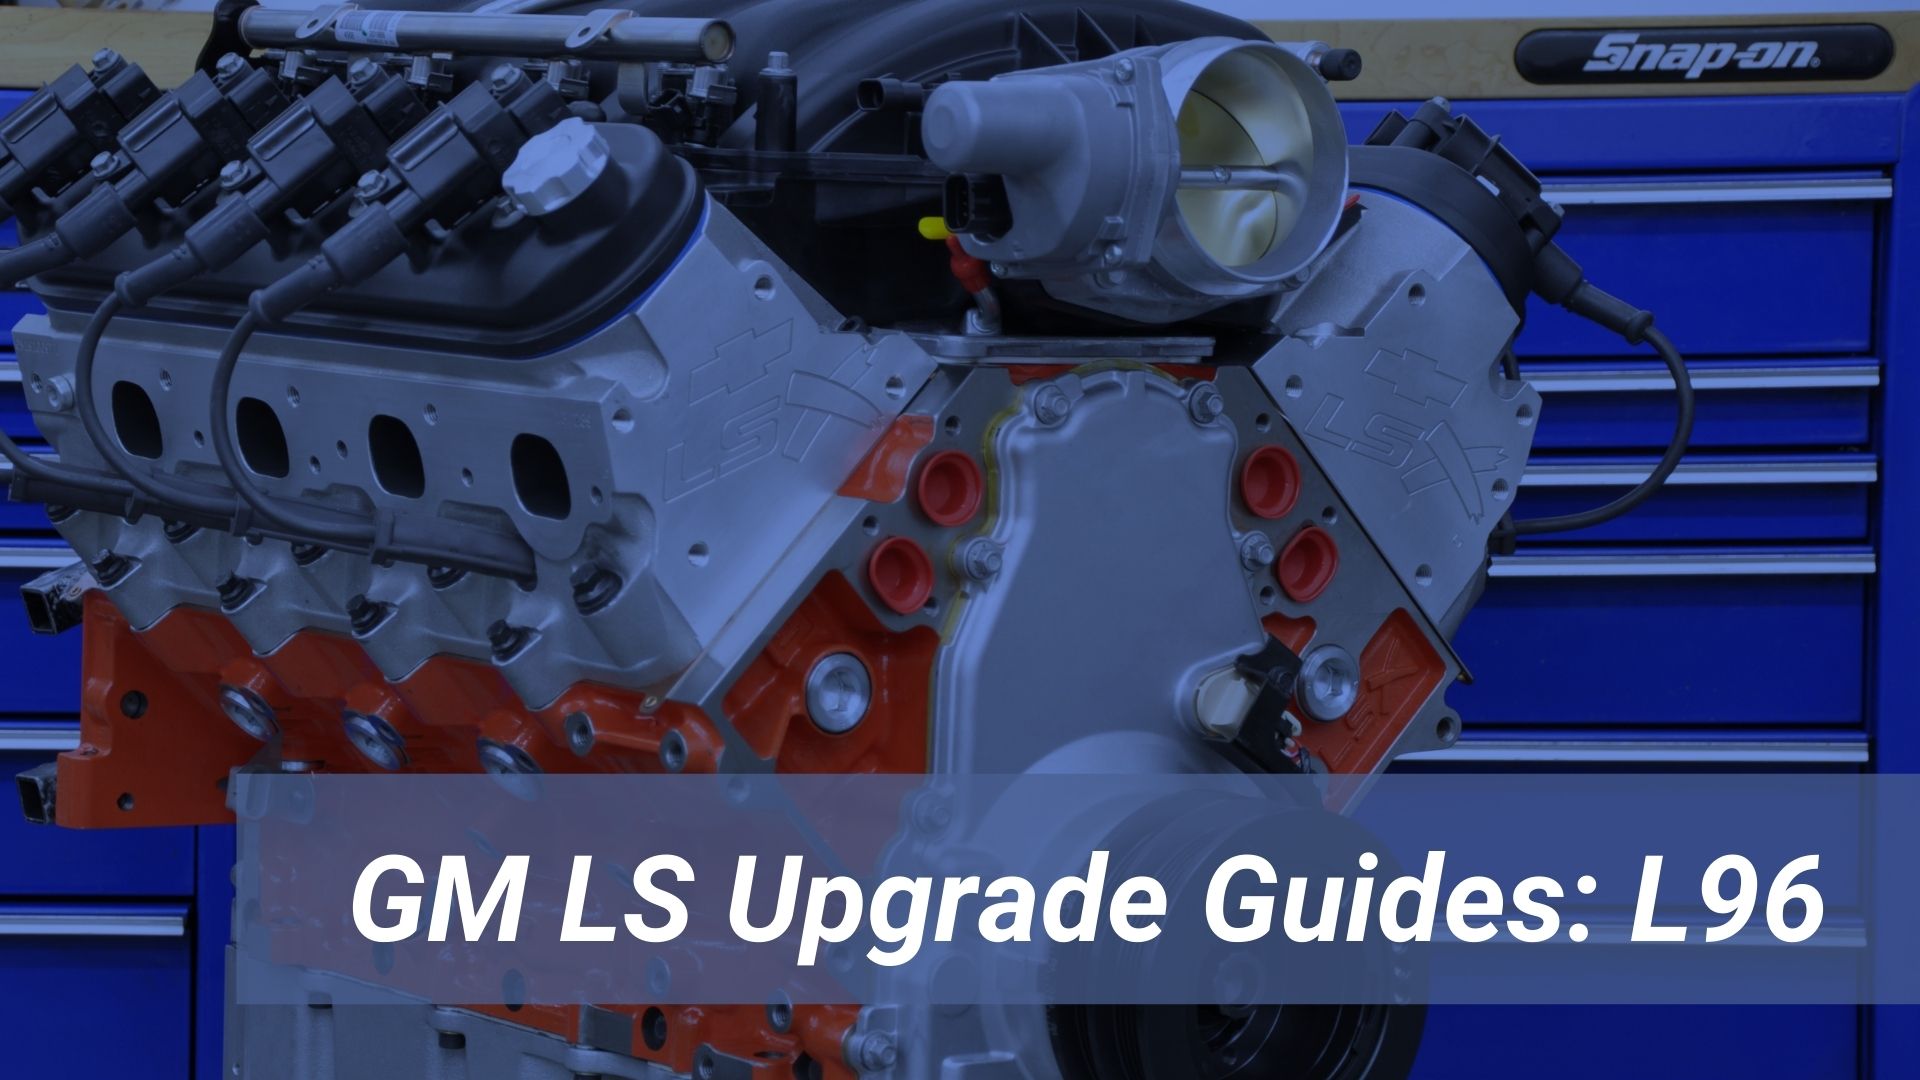 L96 6.0L Engine Upgrade Guide: Expert Advice for L96 Mods to